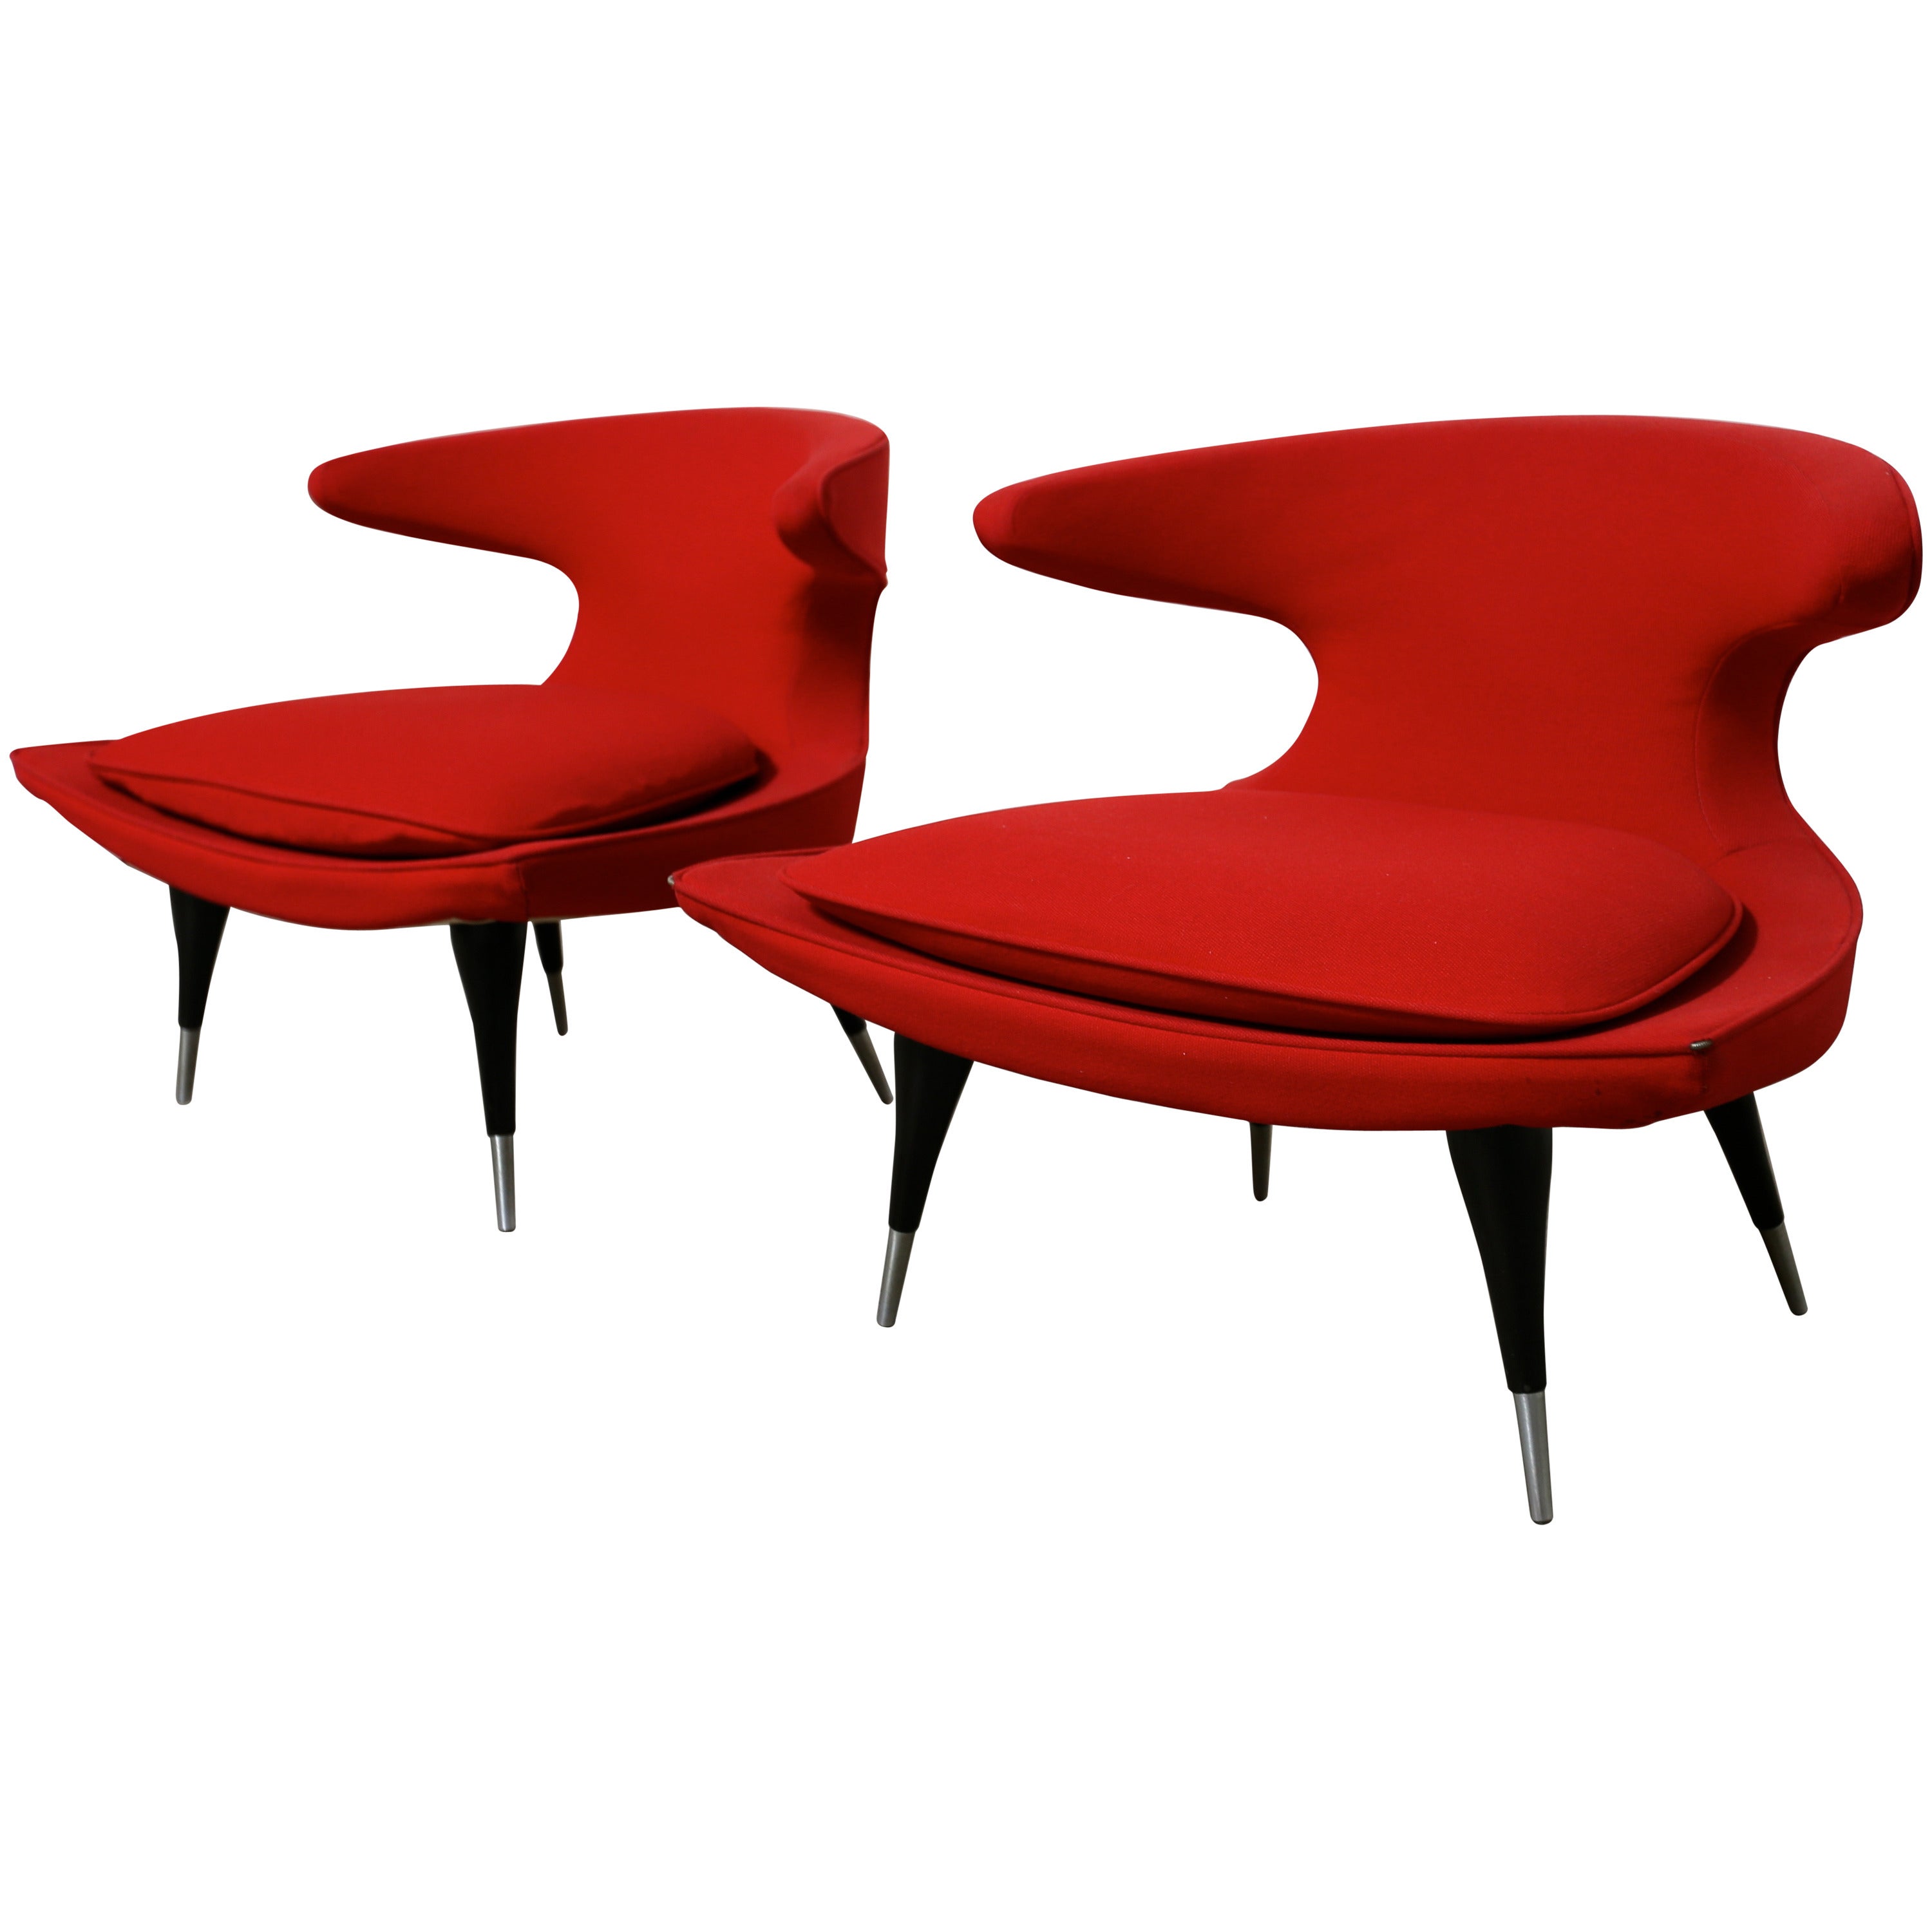 Pair of Sculptural "Horn" Lounge Chairs by Karpen